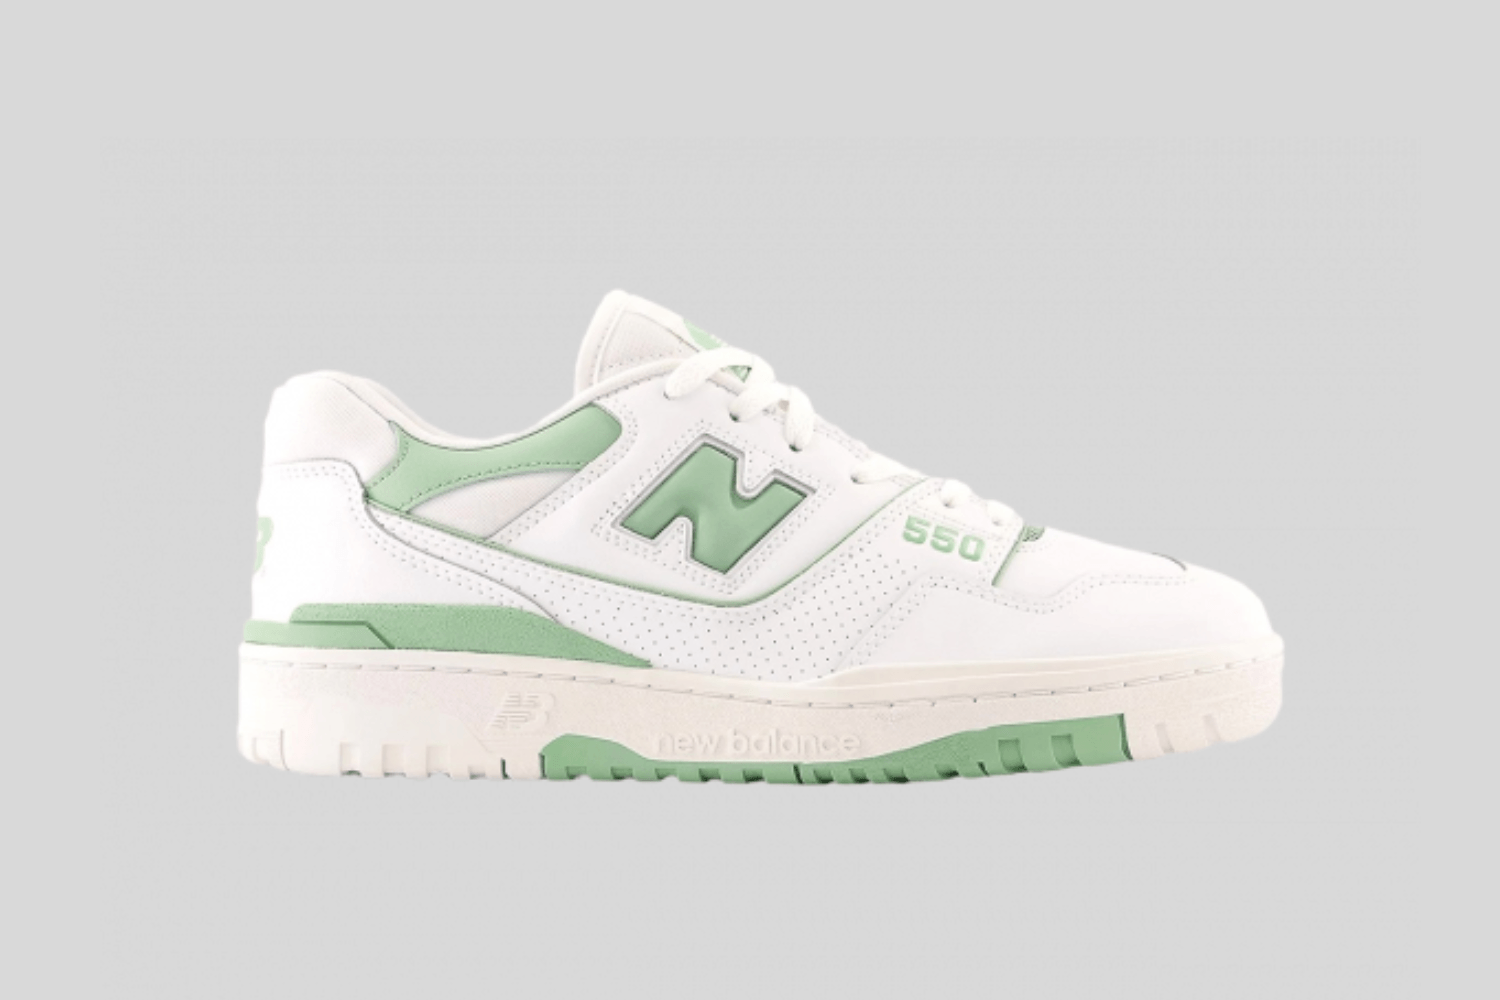 The New Balance 550 drops in 'Mint Green'